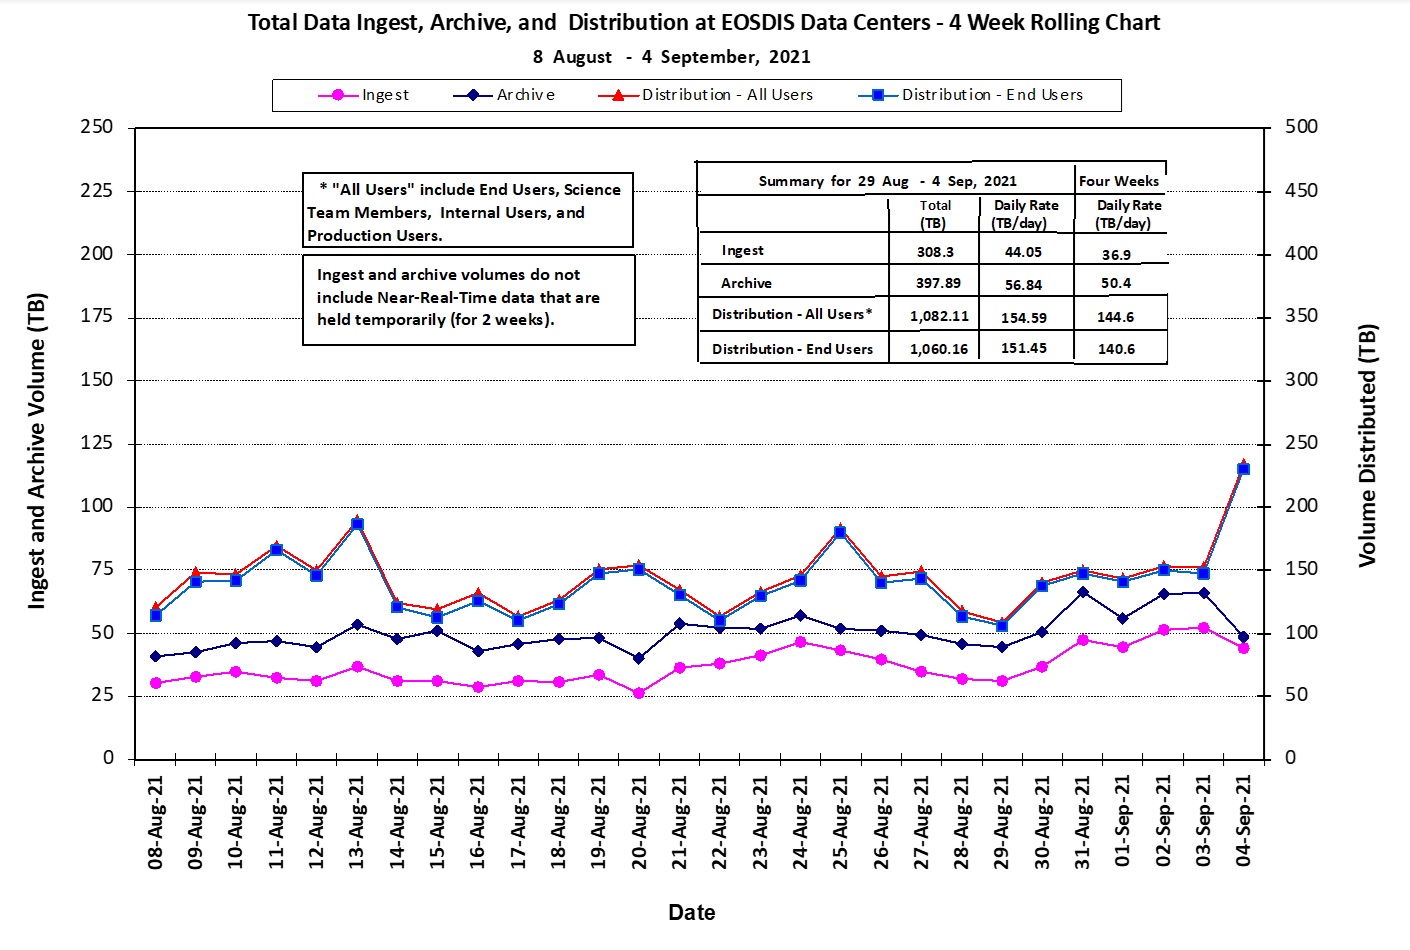 Chart of Total Data Use for ESDIS 8 Aug - 4 Sept, 2021